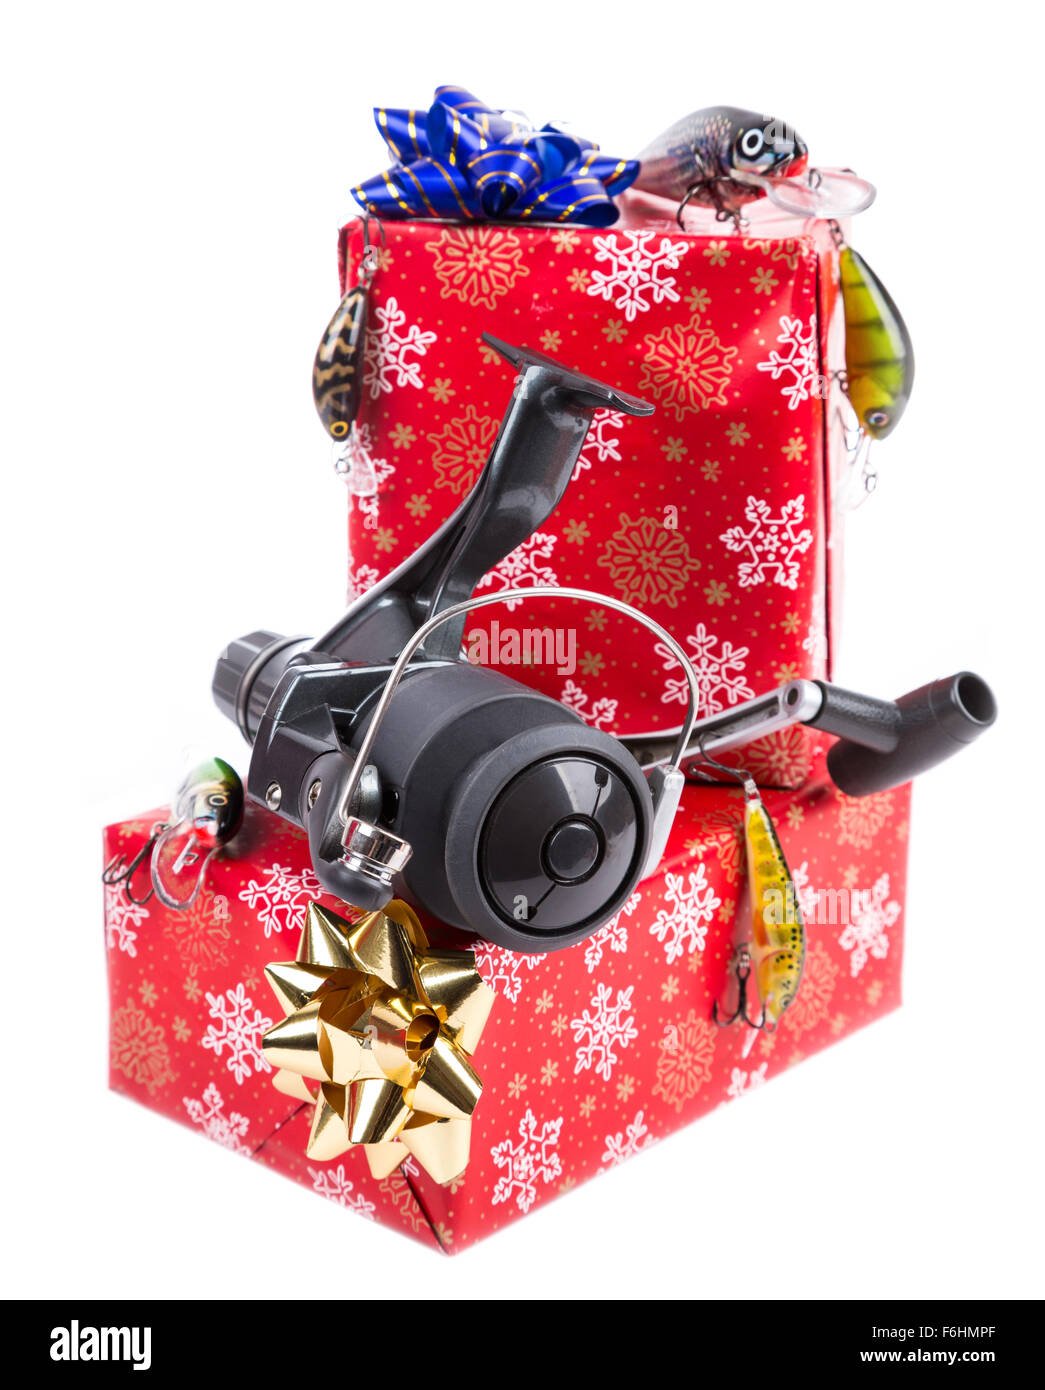 https://c8.alamy.com/comp/F6HMPF/christmas-and-new-year-a-gift-and-present-in-red-box-for-fishers-and-F6HMPF.jpg